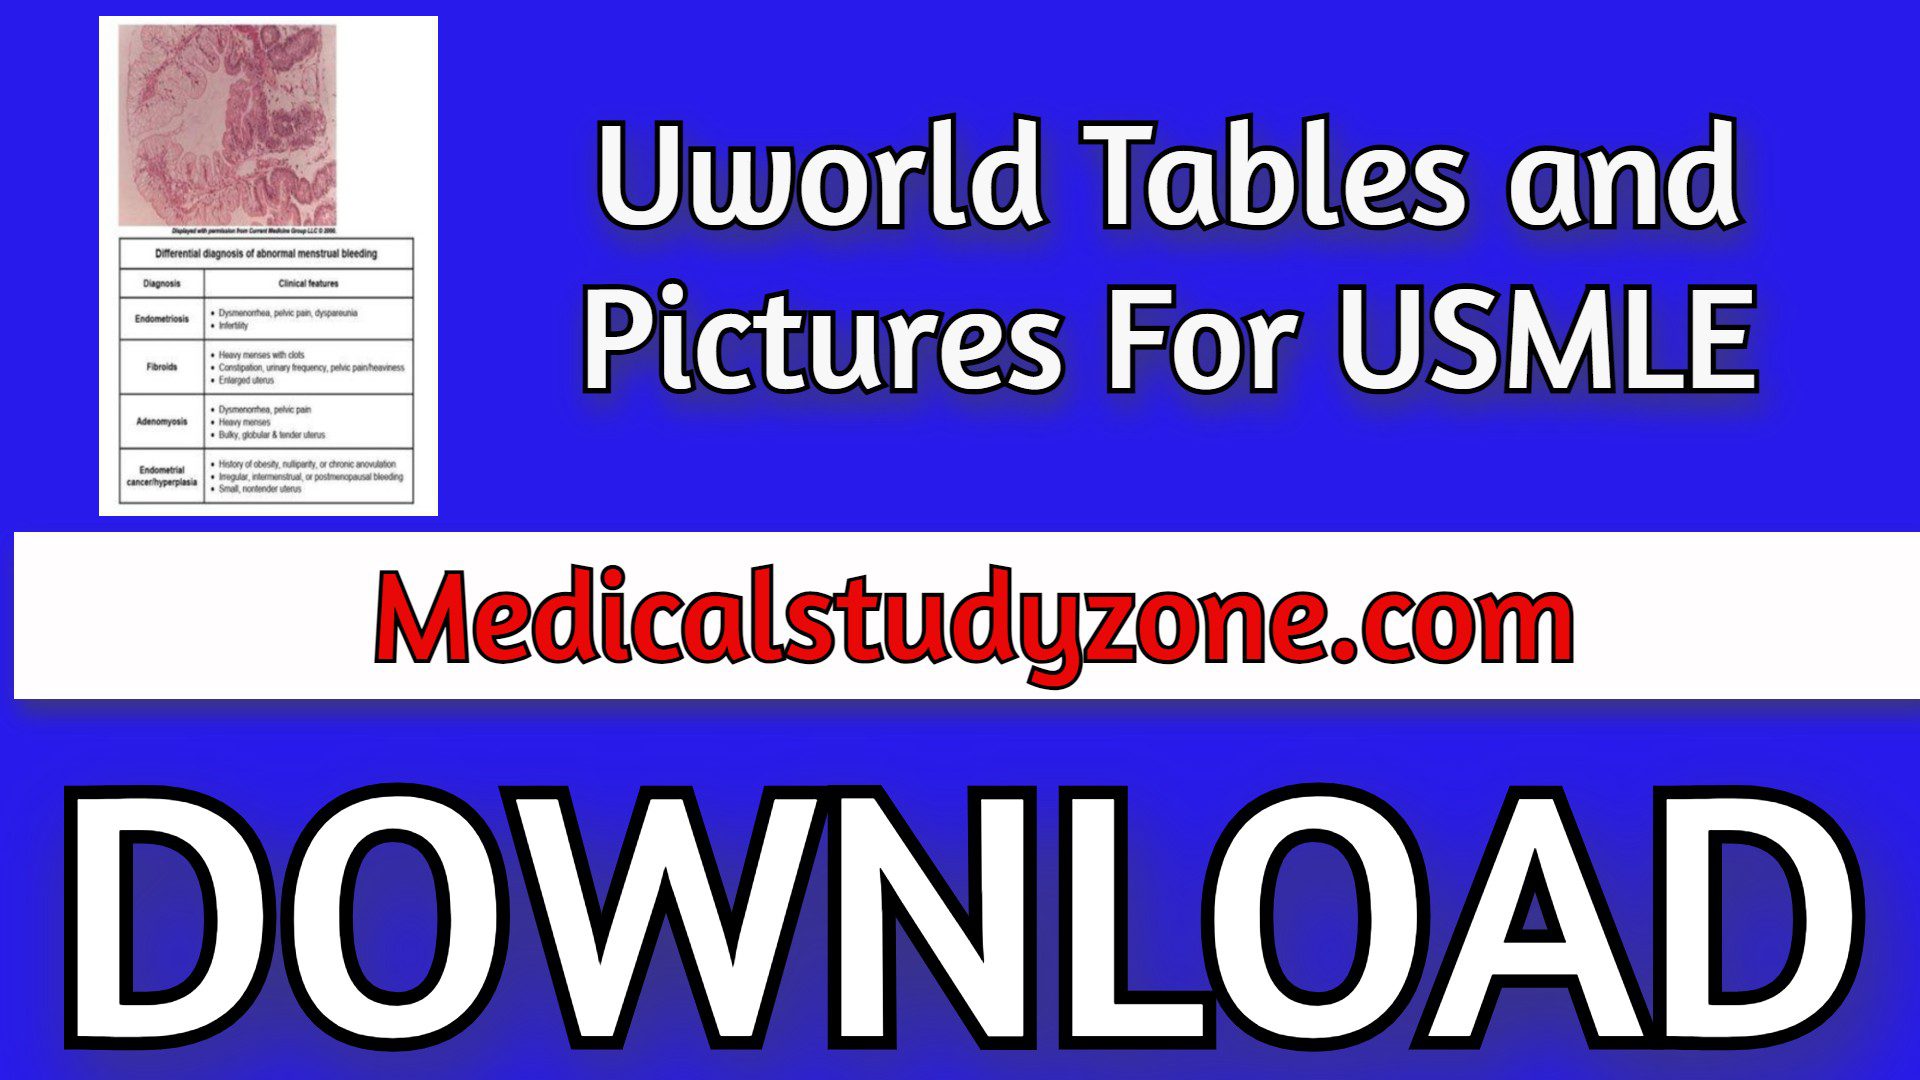 Uworld Tables and Pictures For USMLE 2021 Edition PDF Free Download